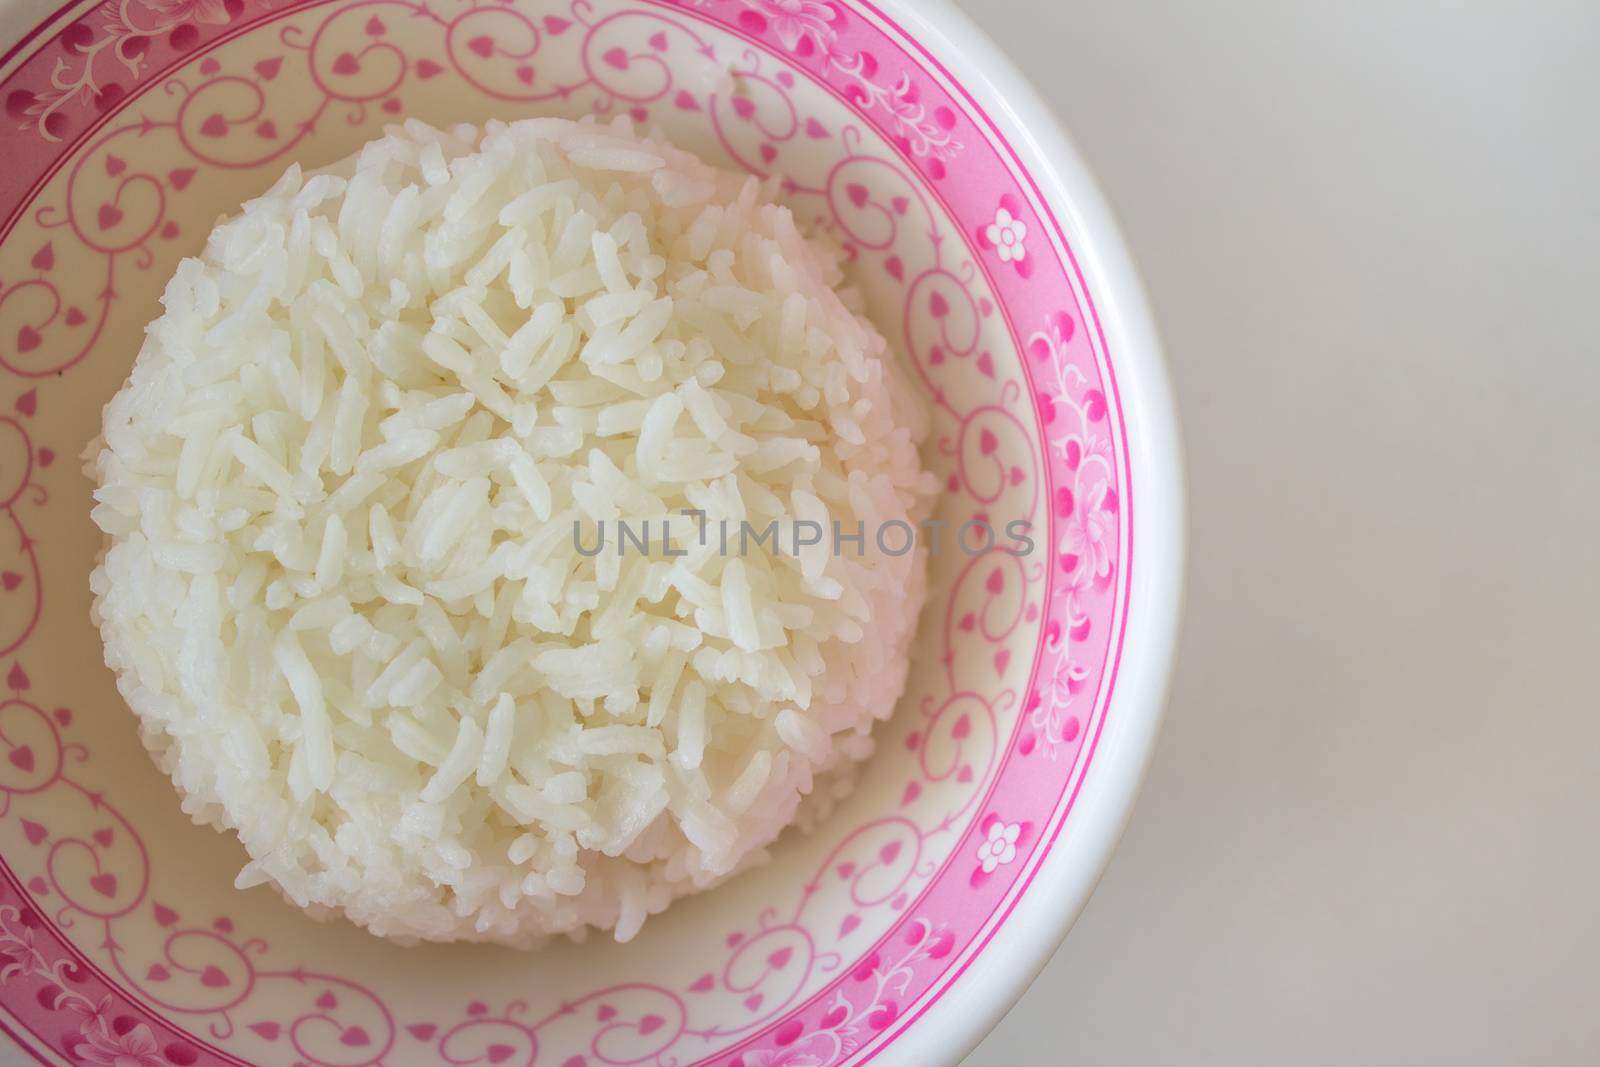 The cooking rice on page